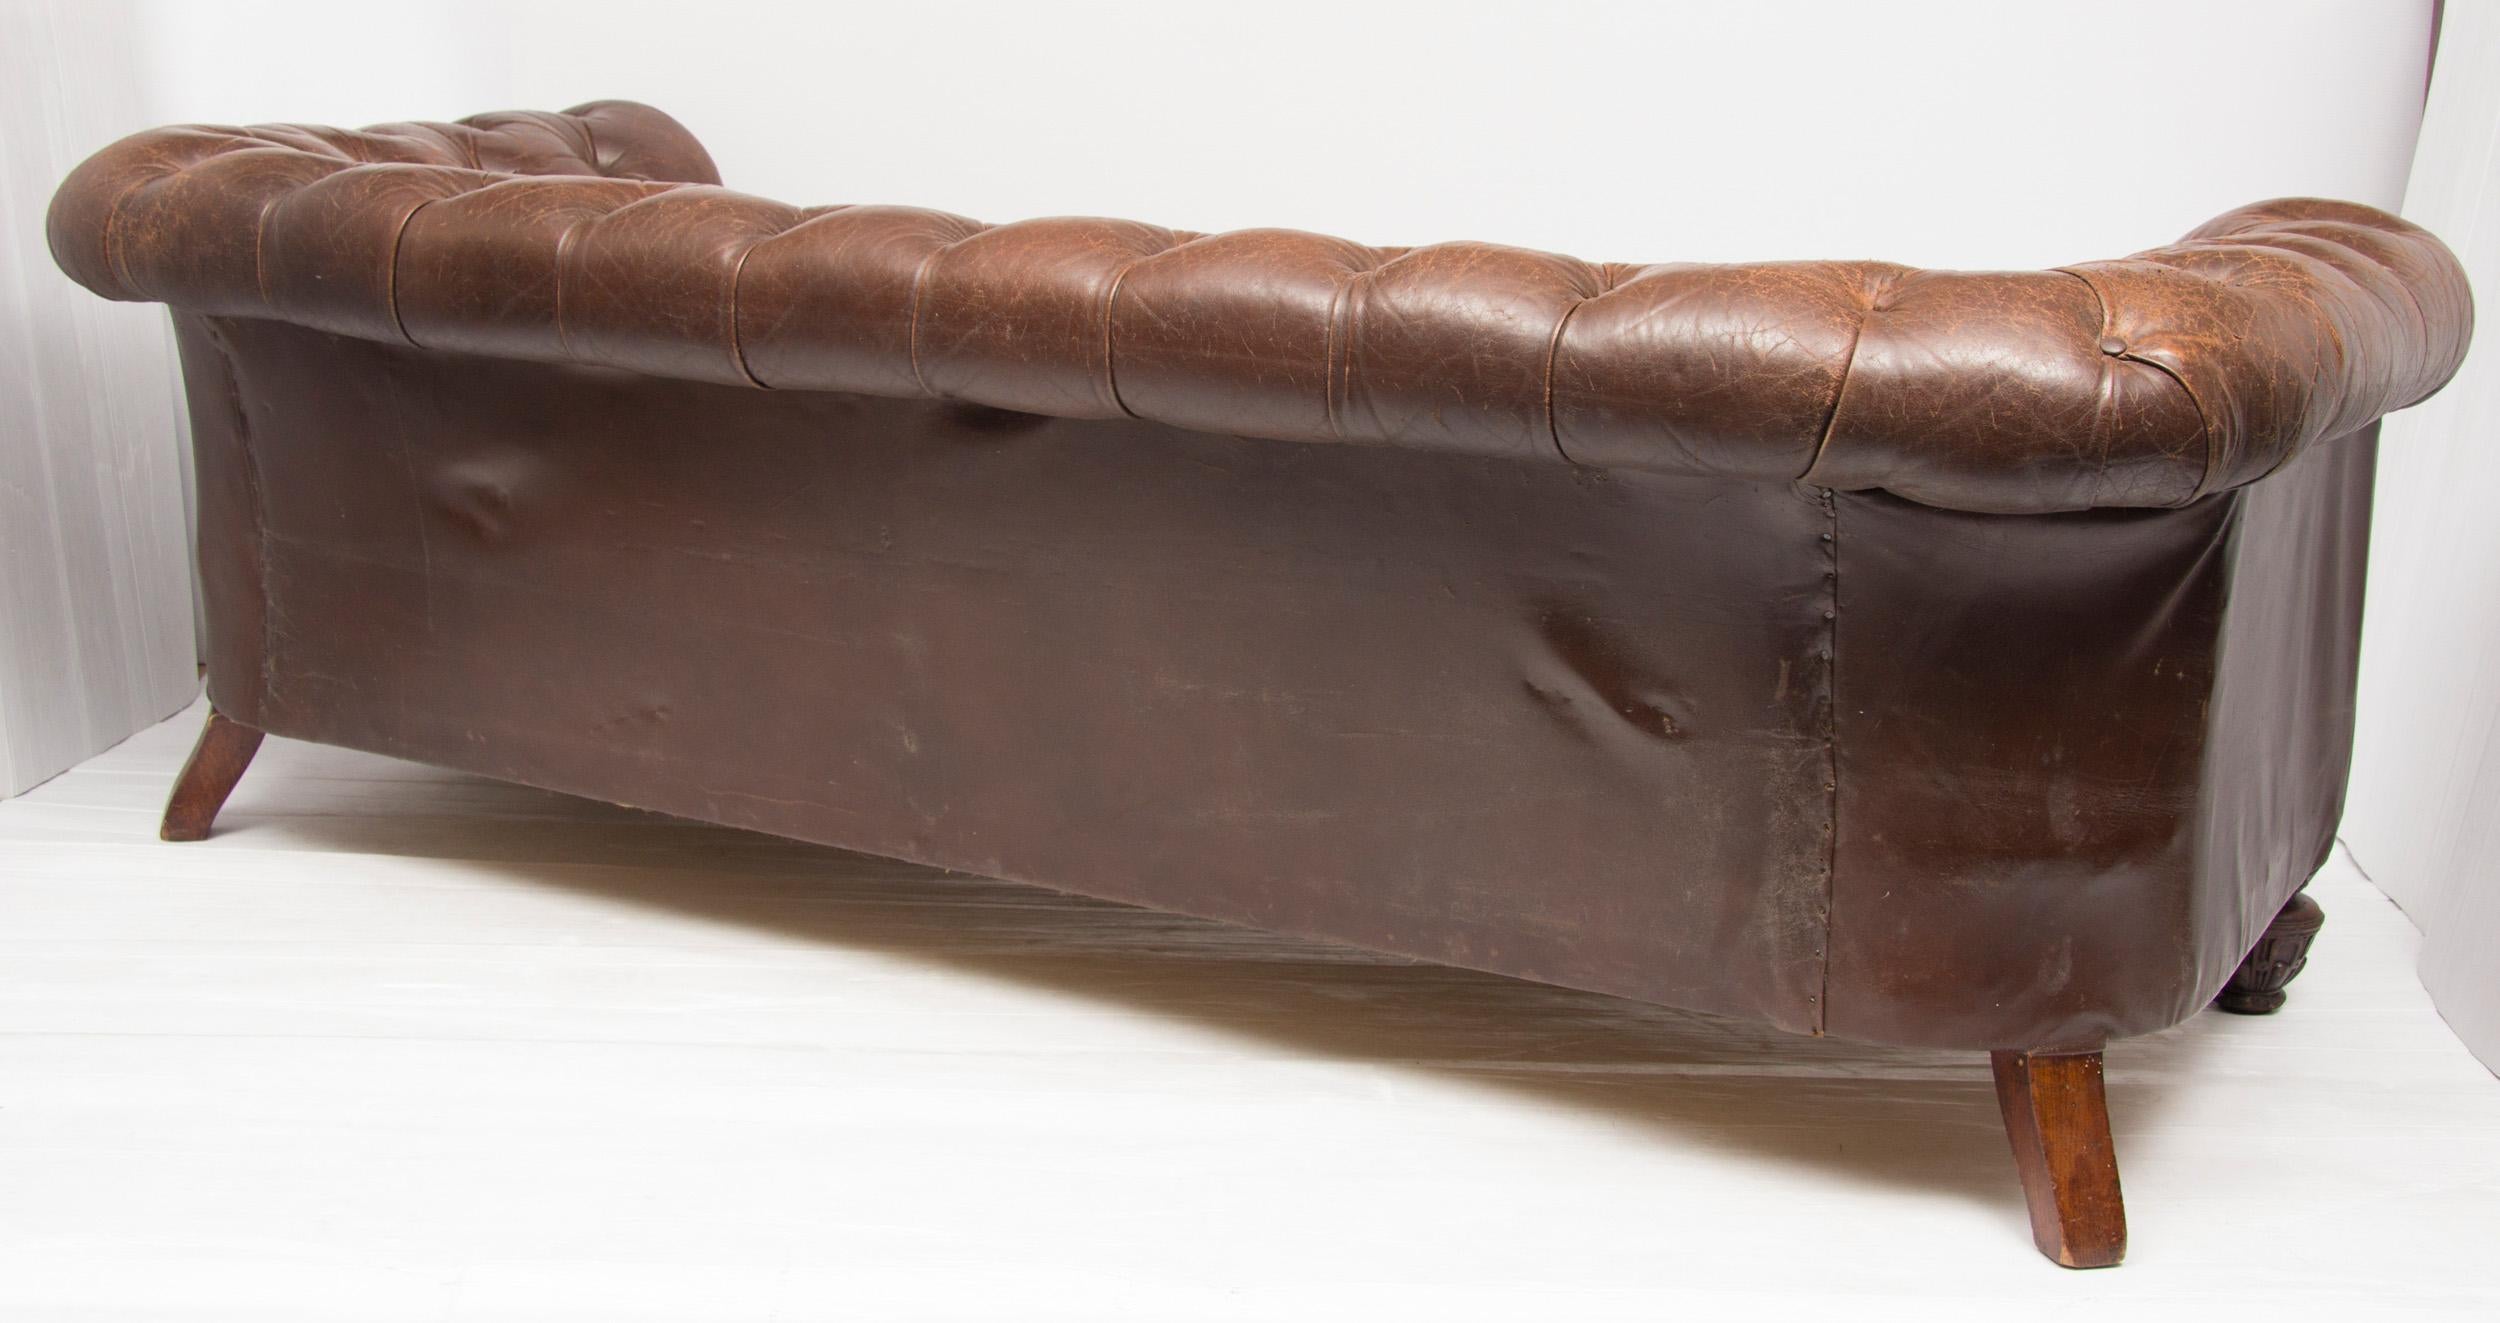 English Edwardian Brown Leather Chesterfield Sofa.